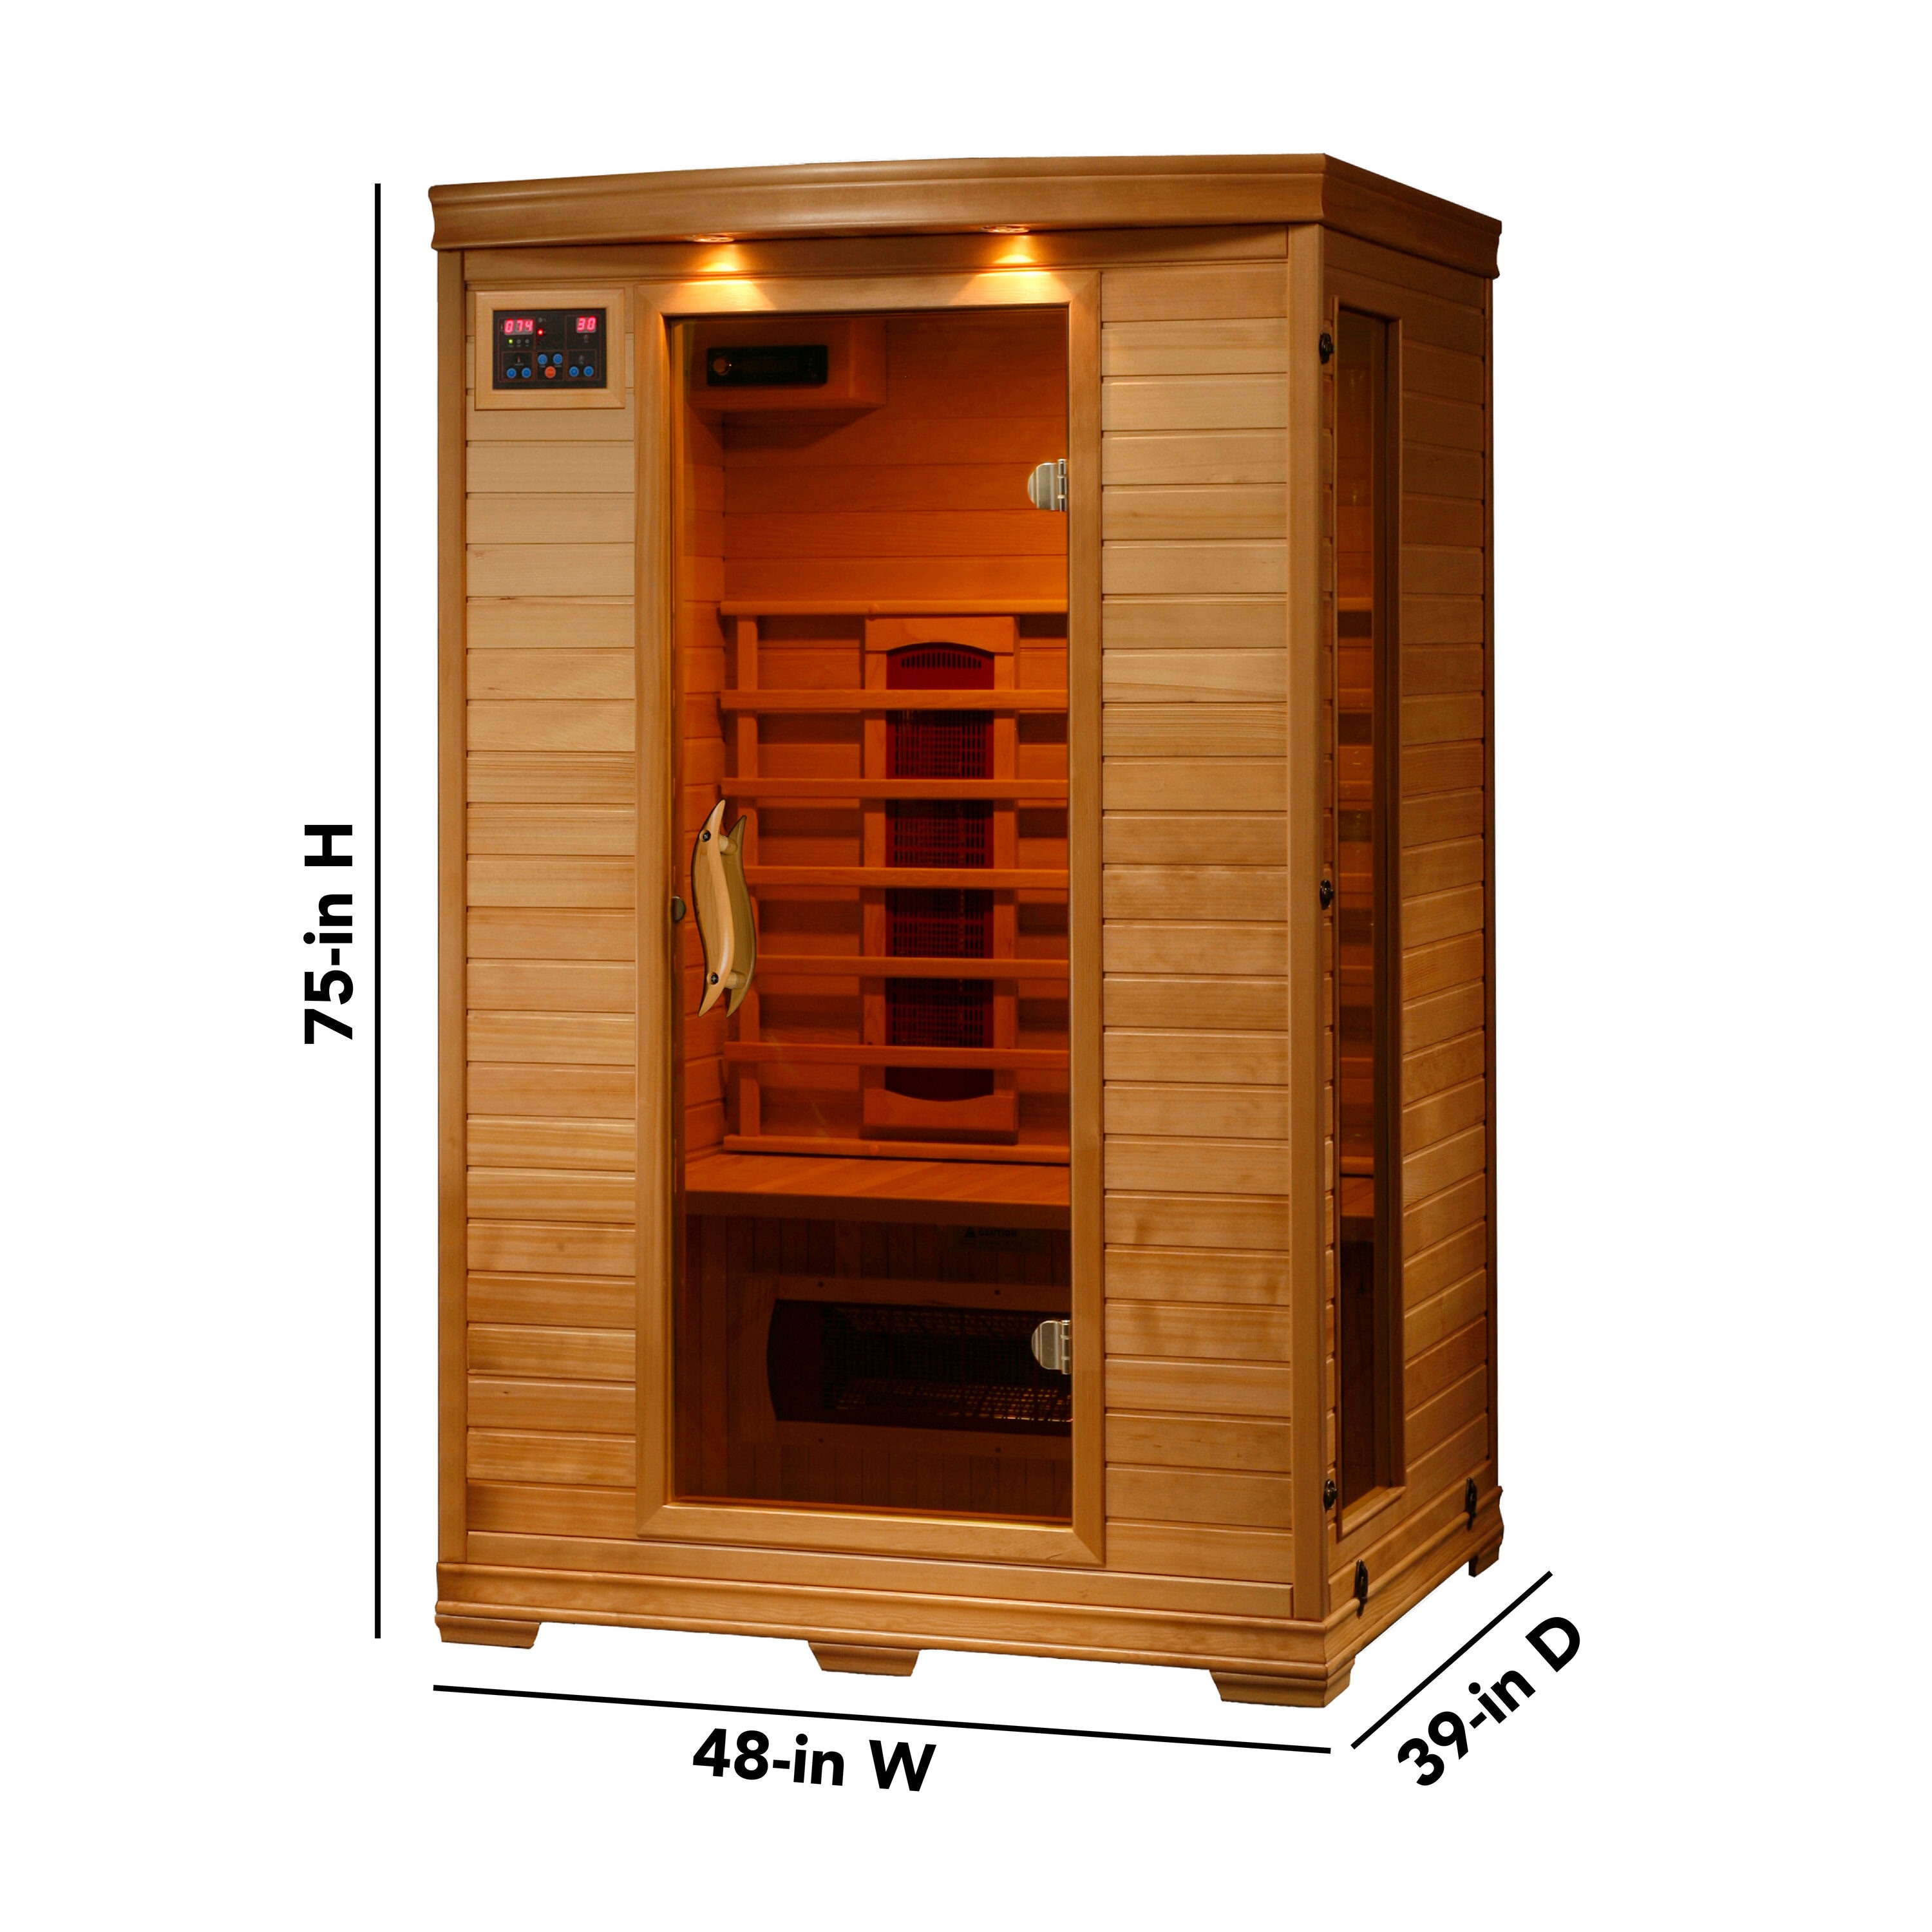 Who Sells Infrared Saunas Near Me?